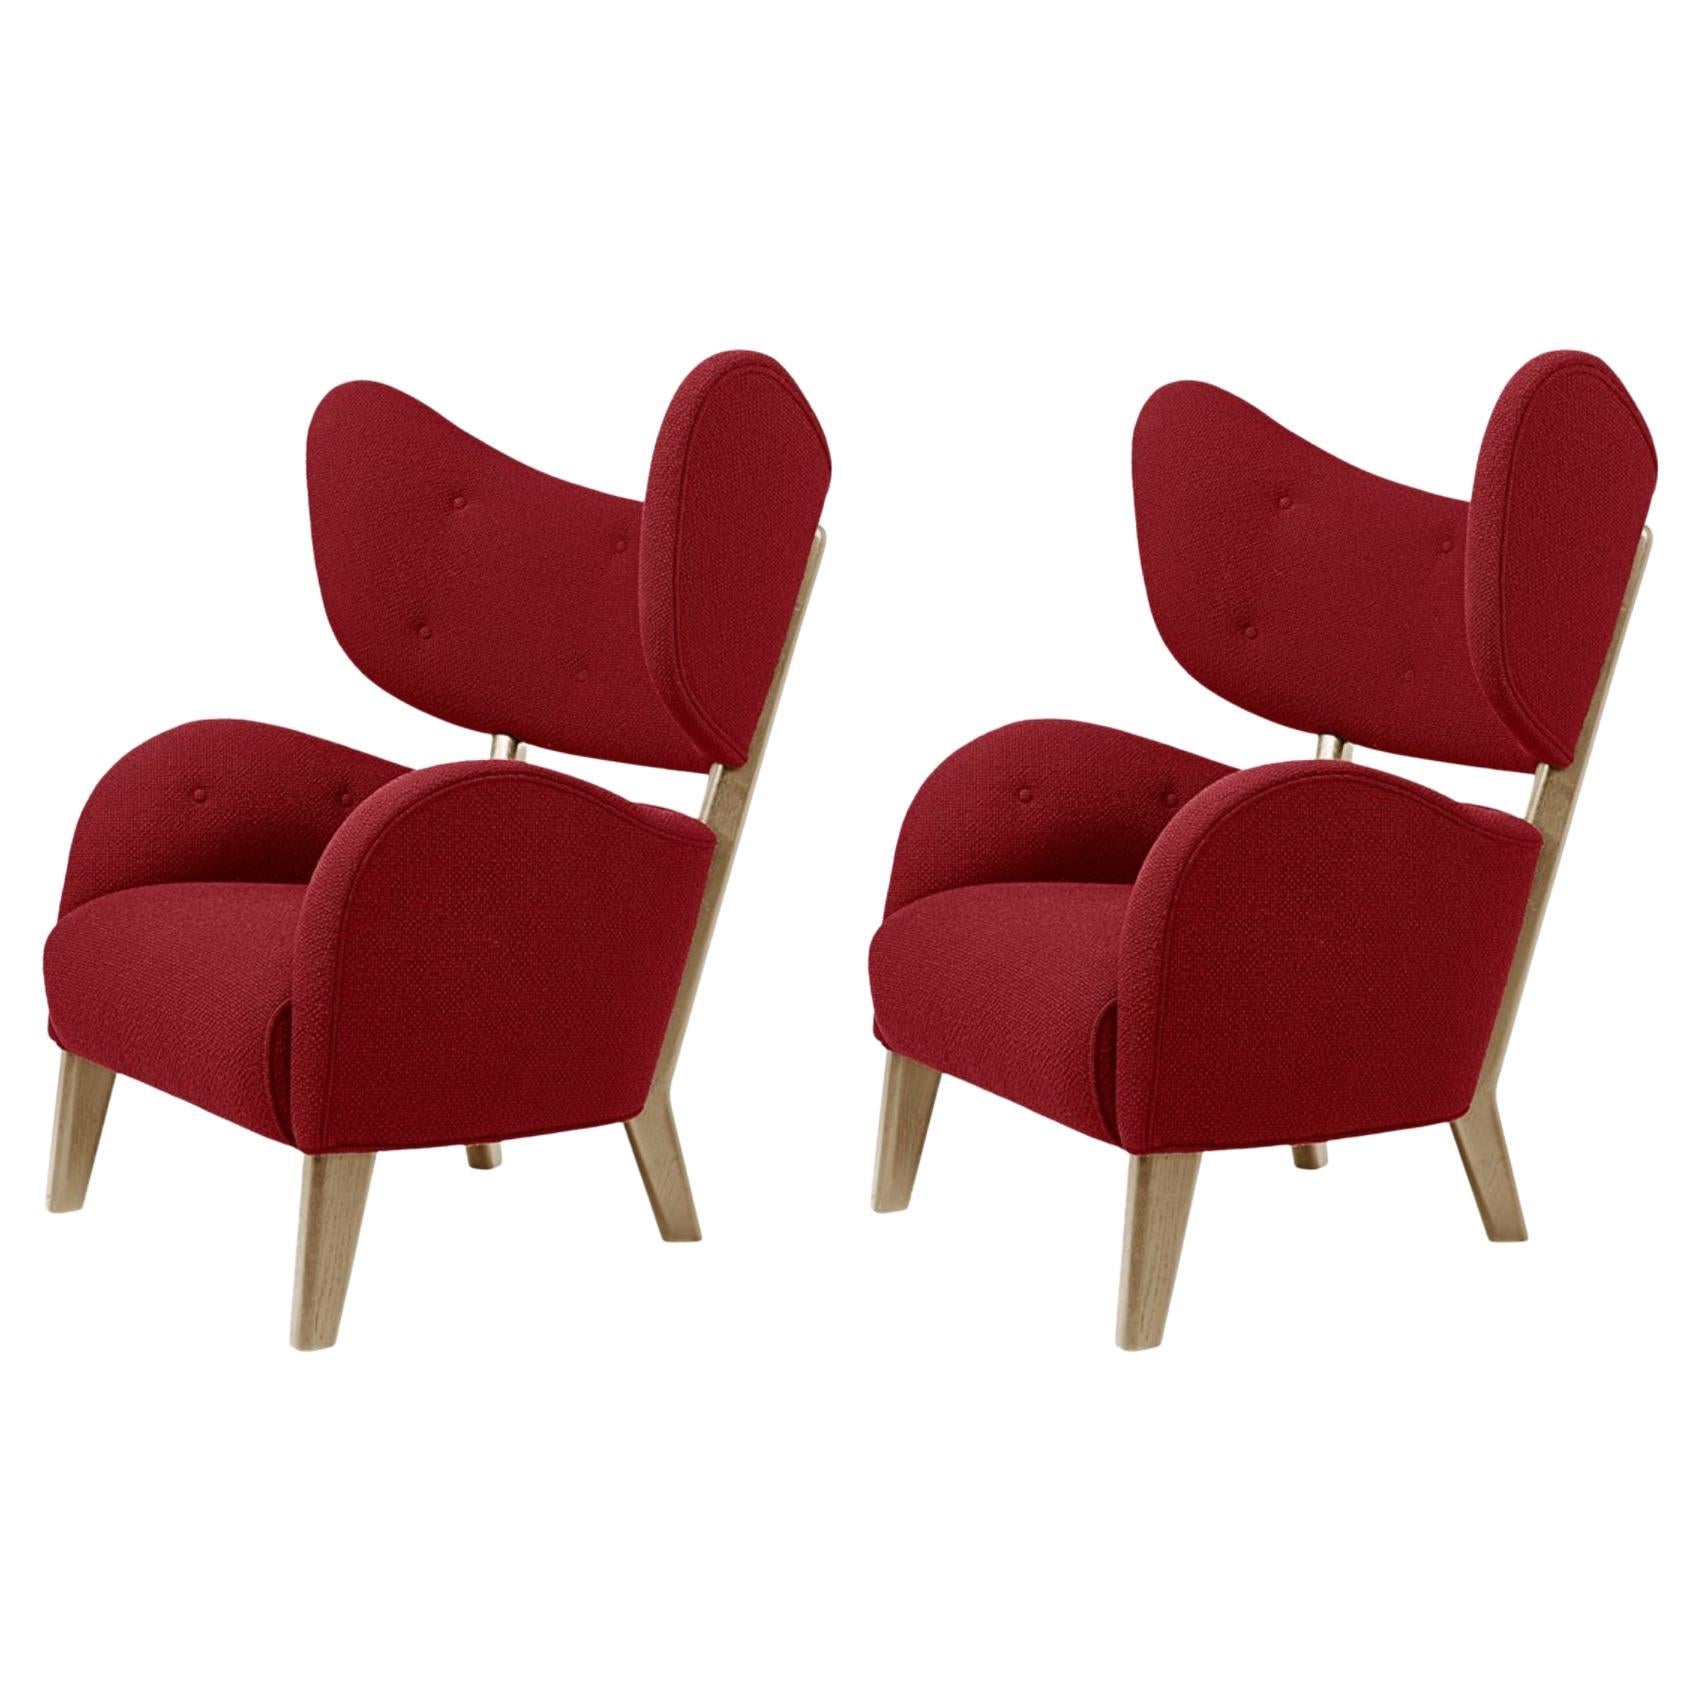 Set of 2 Red Raf Simons Vidar 3 Natural Oak My Own Chair Lounge Chairs by Lassen For Sale